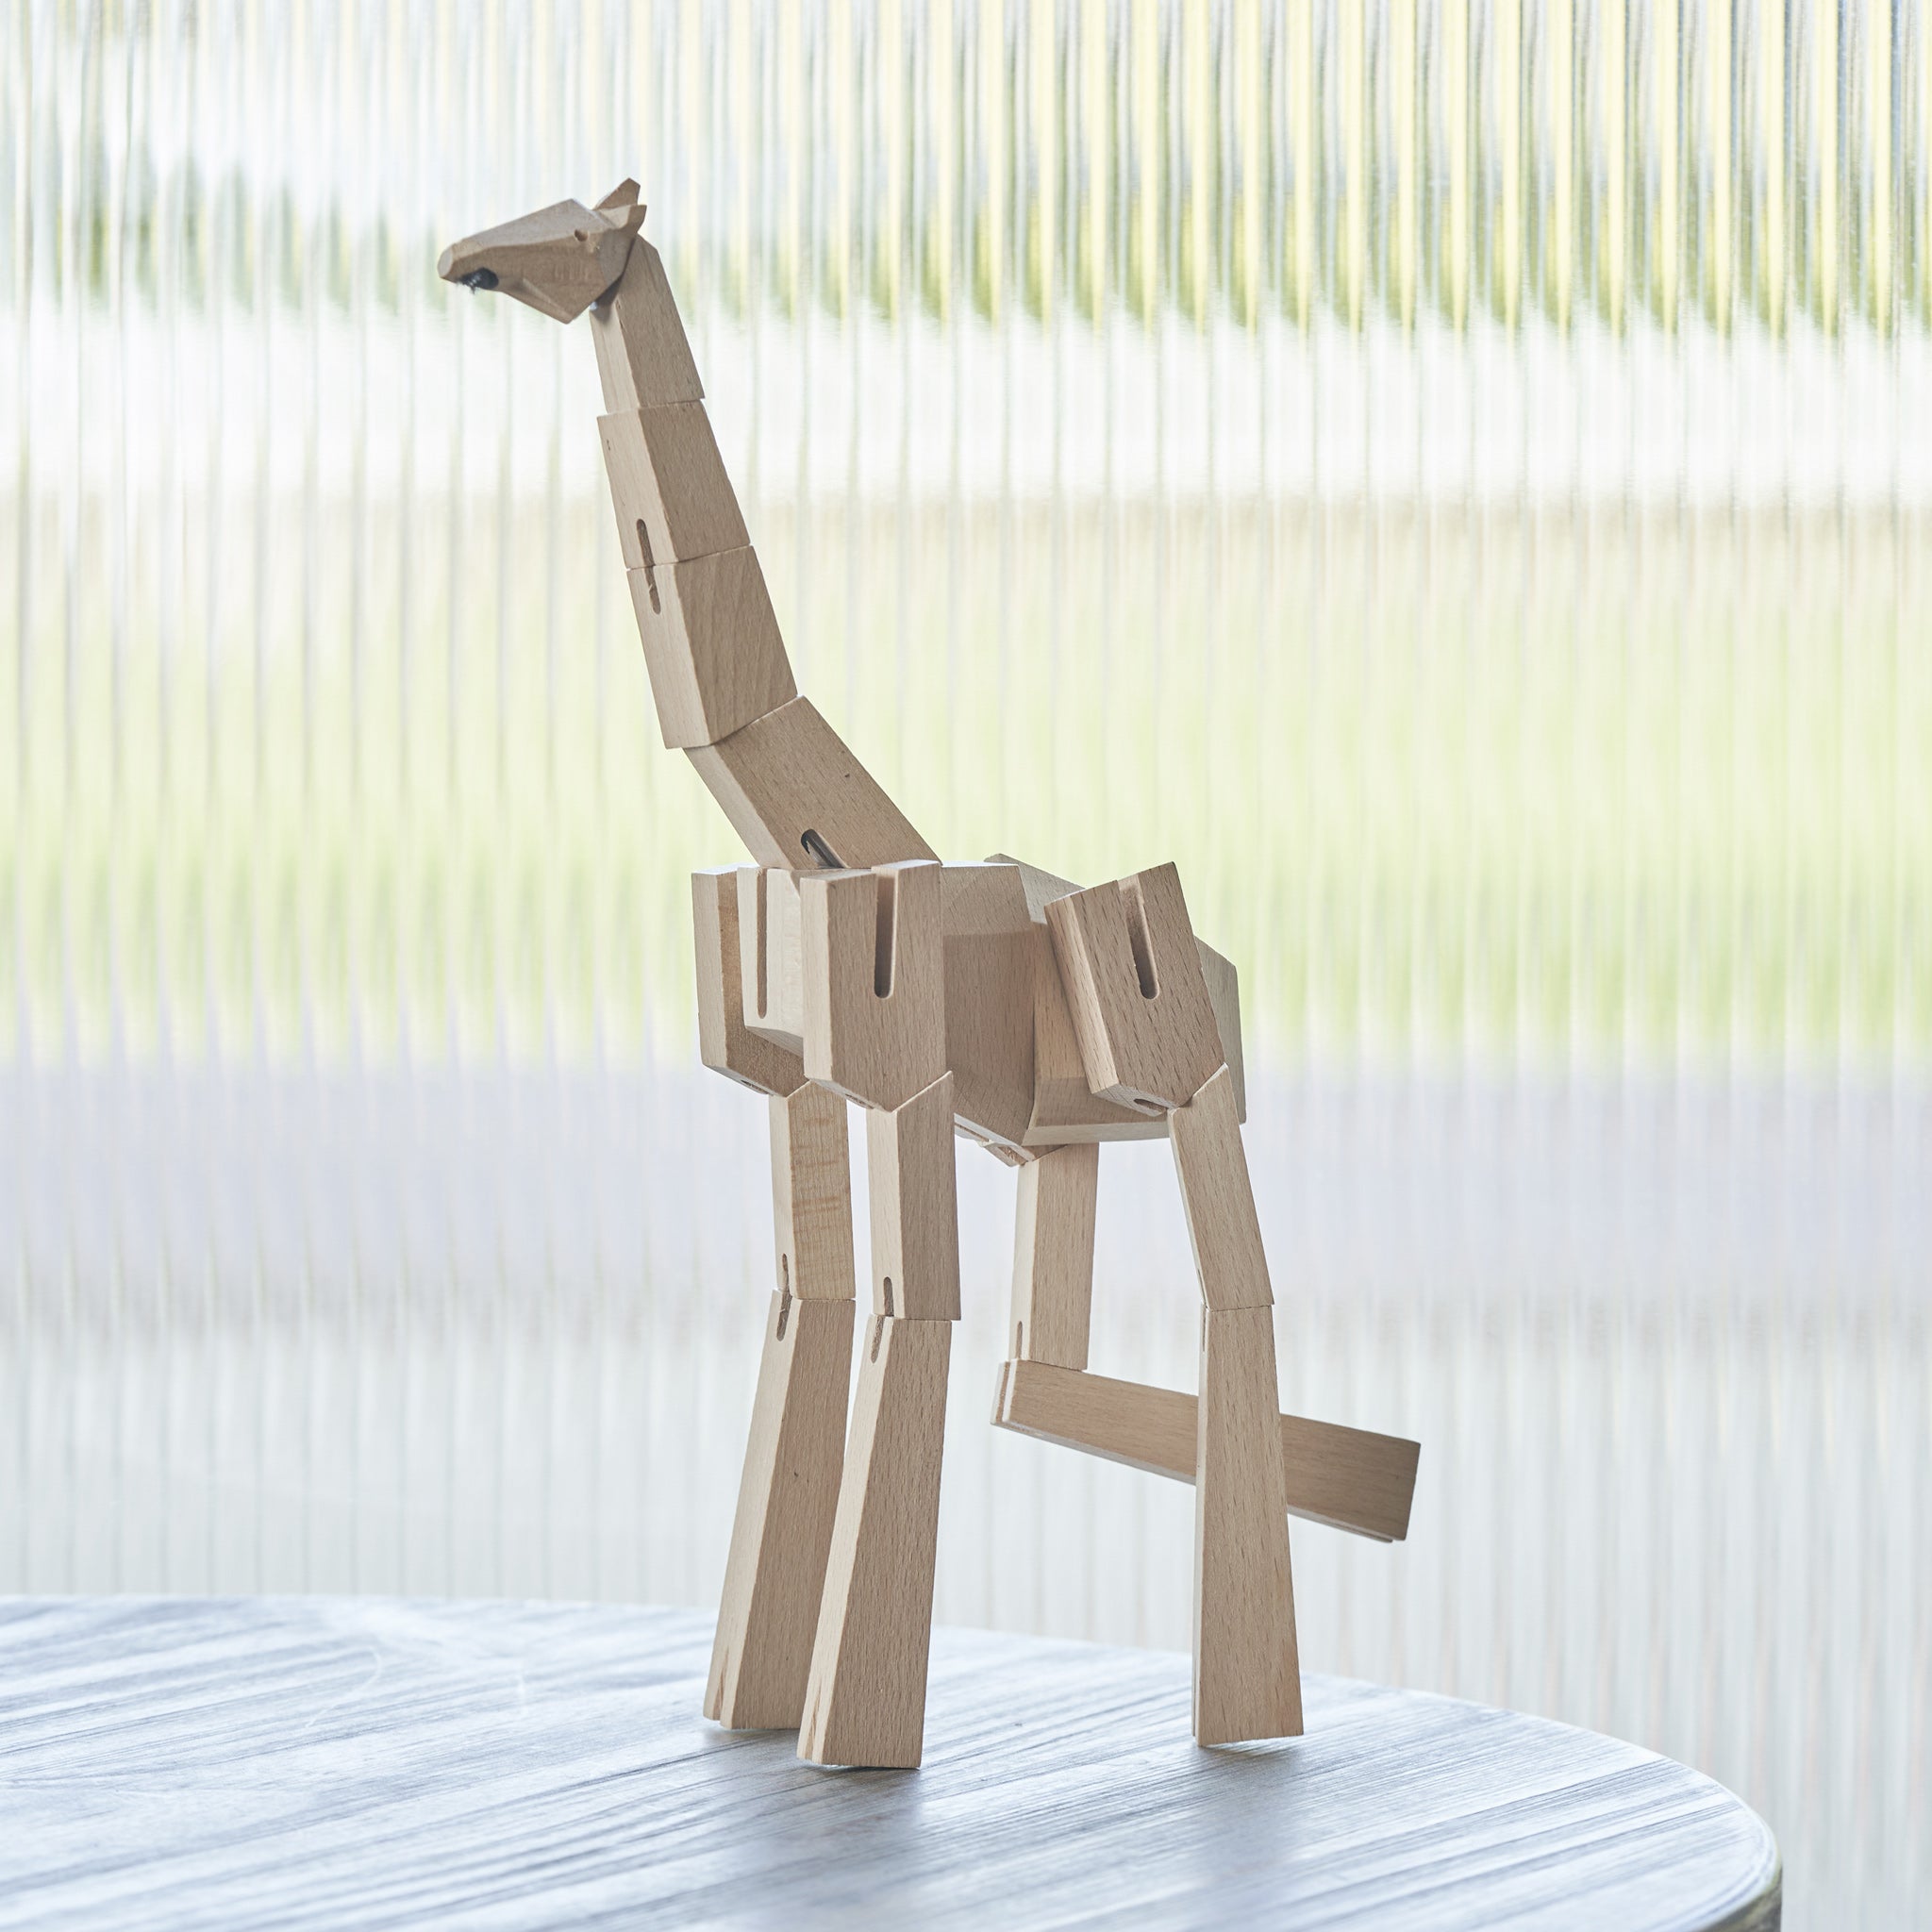 Morphits ® Giraffe Wooden Toy: Elevate Playtime with Tall Tales in our Wooden Playset World - Yoshiaki Ito Design Stand N3